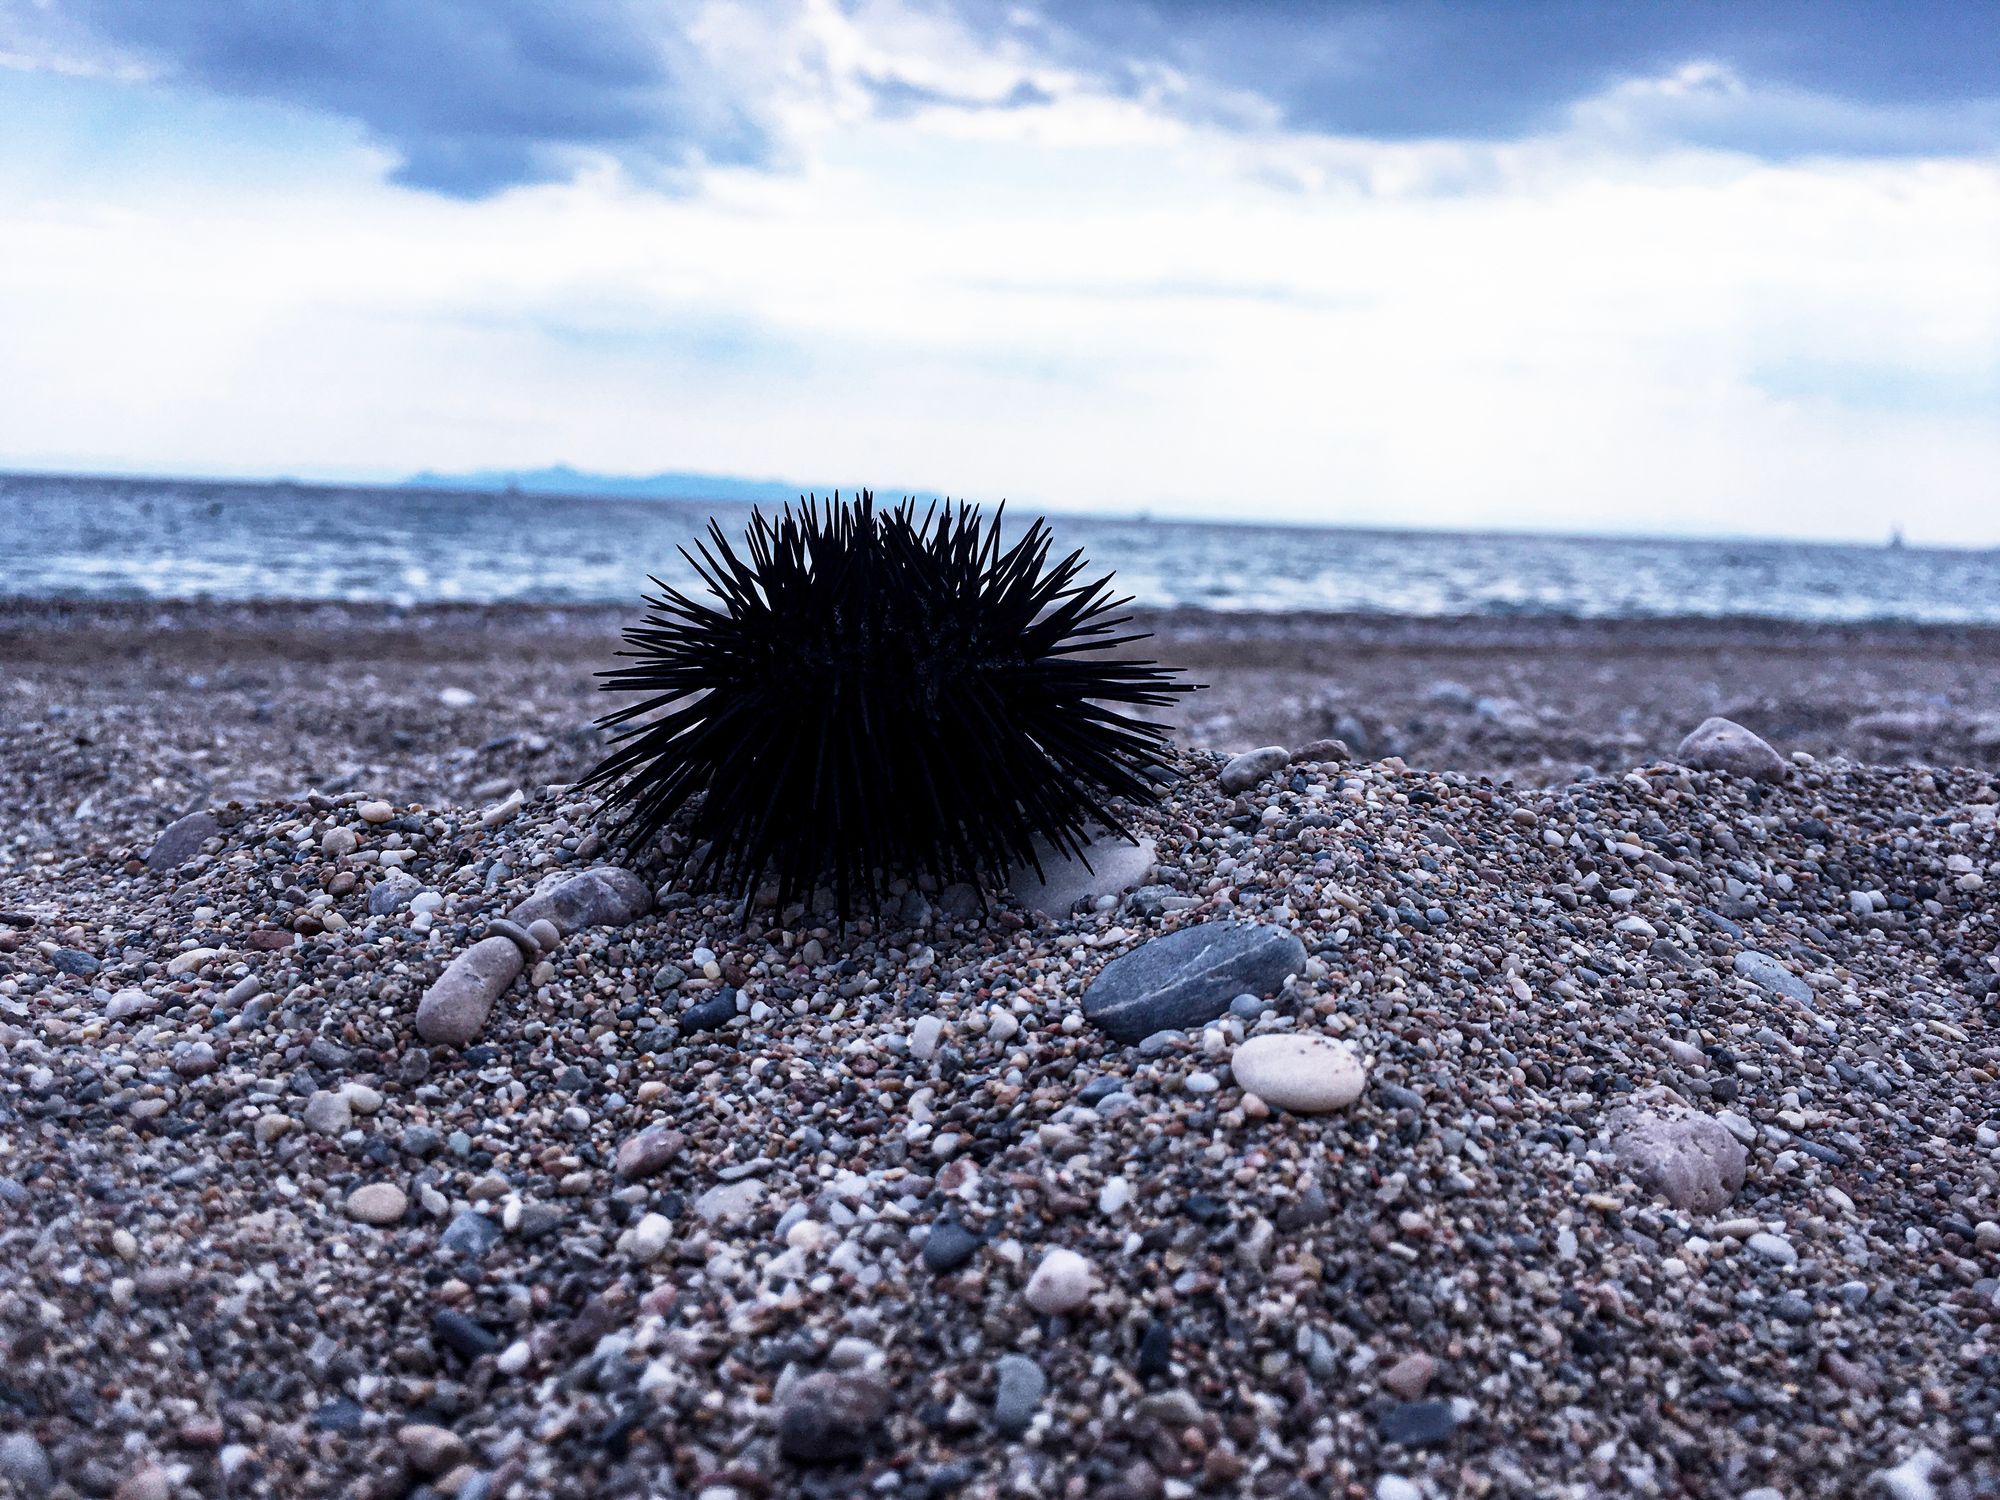 An image of a black sea urchin on a rocky shore.